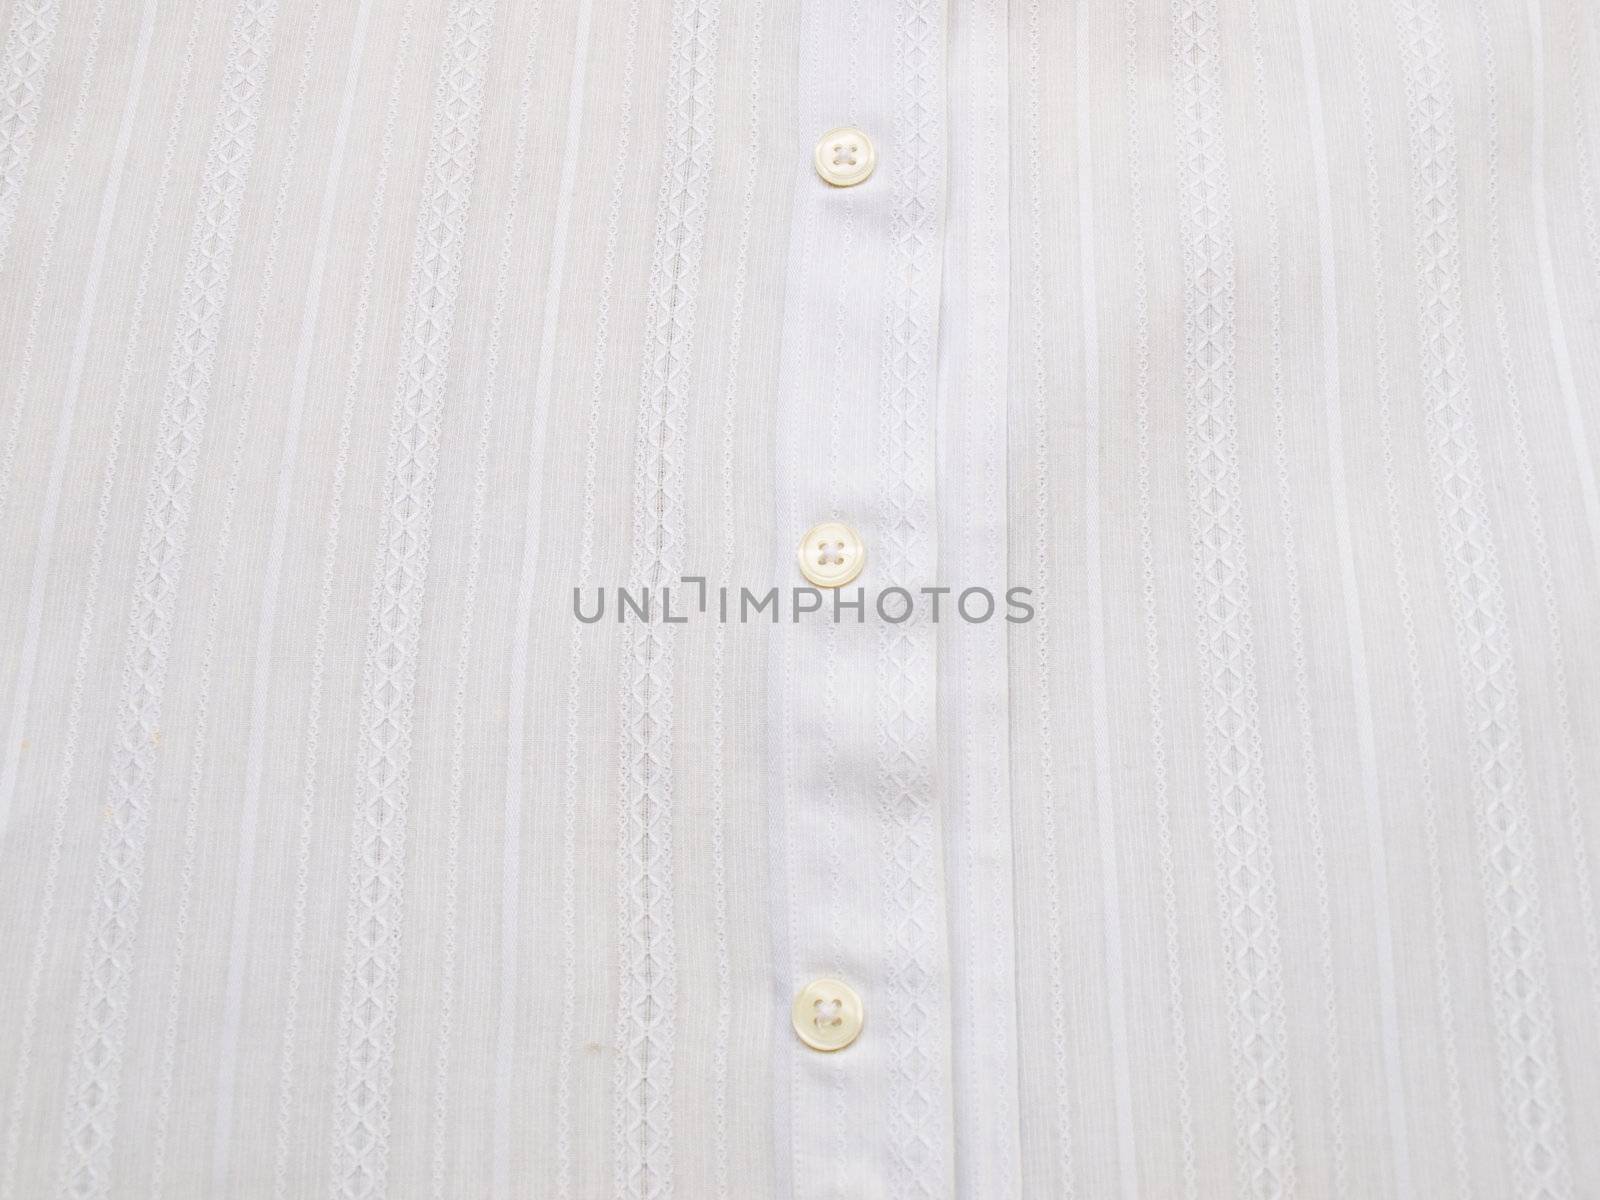 Linear cotton fabric as background with button